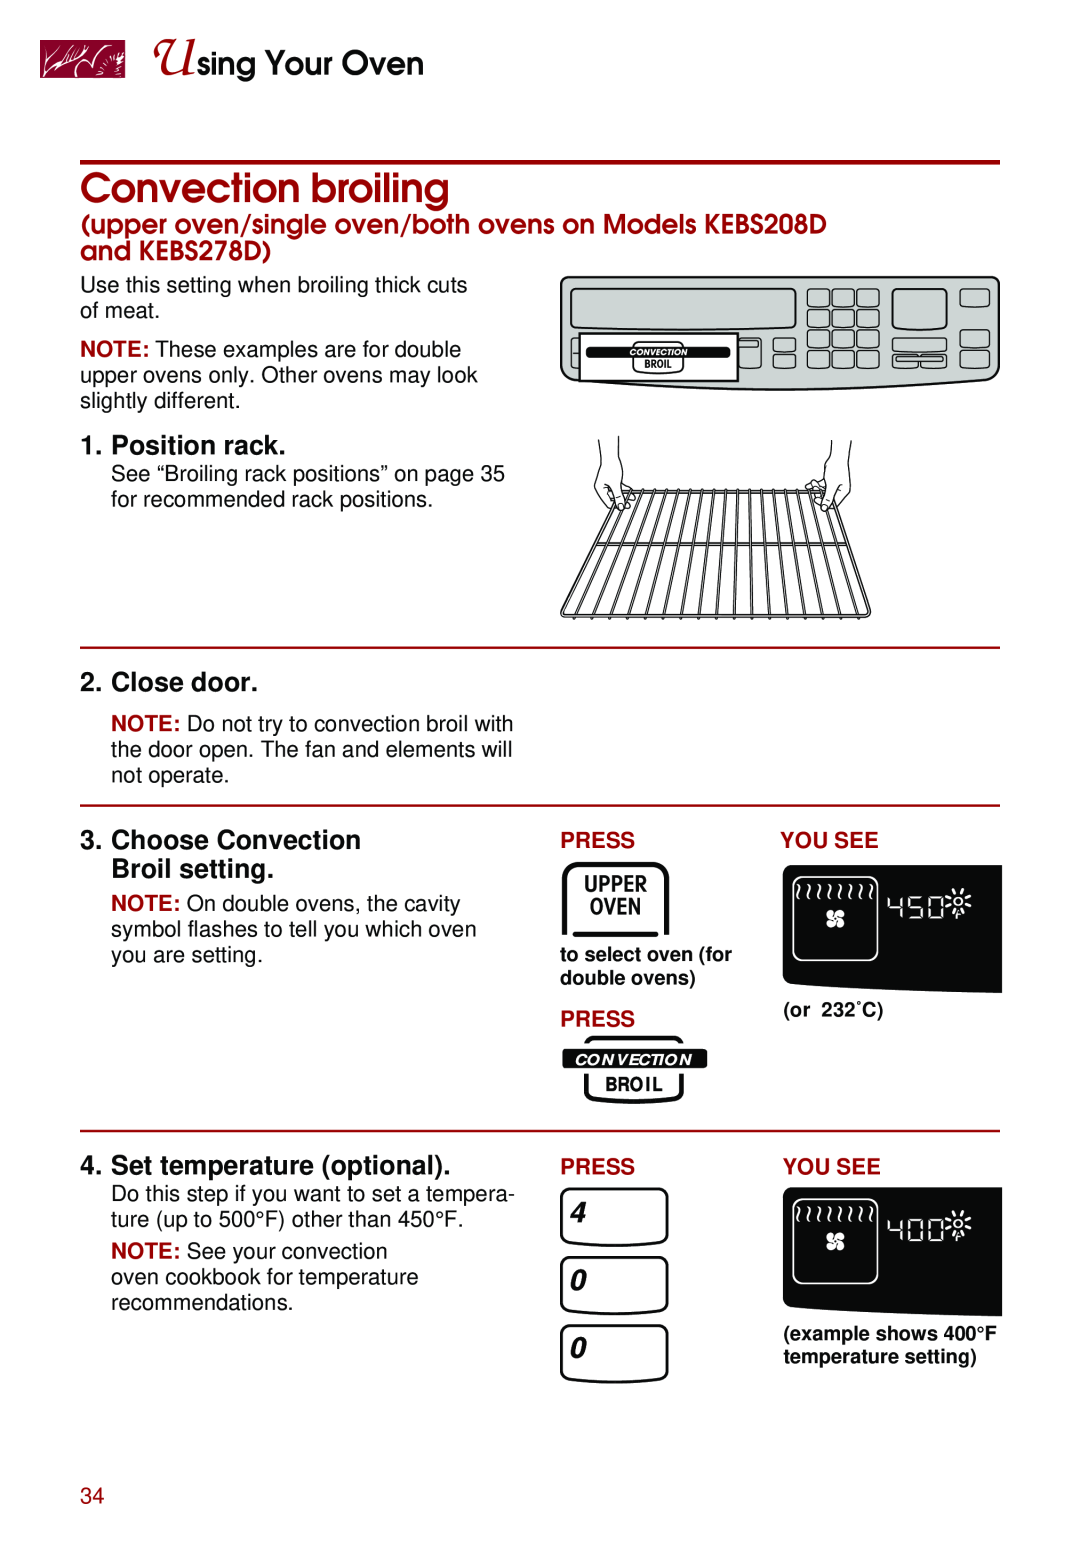 Whirlpool KEBS277D Convection broiling, Close door, Choose Convection, Broil setting, Set temperature optional, Press 